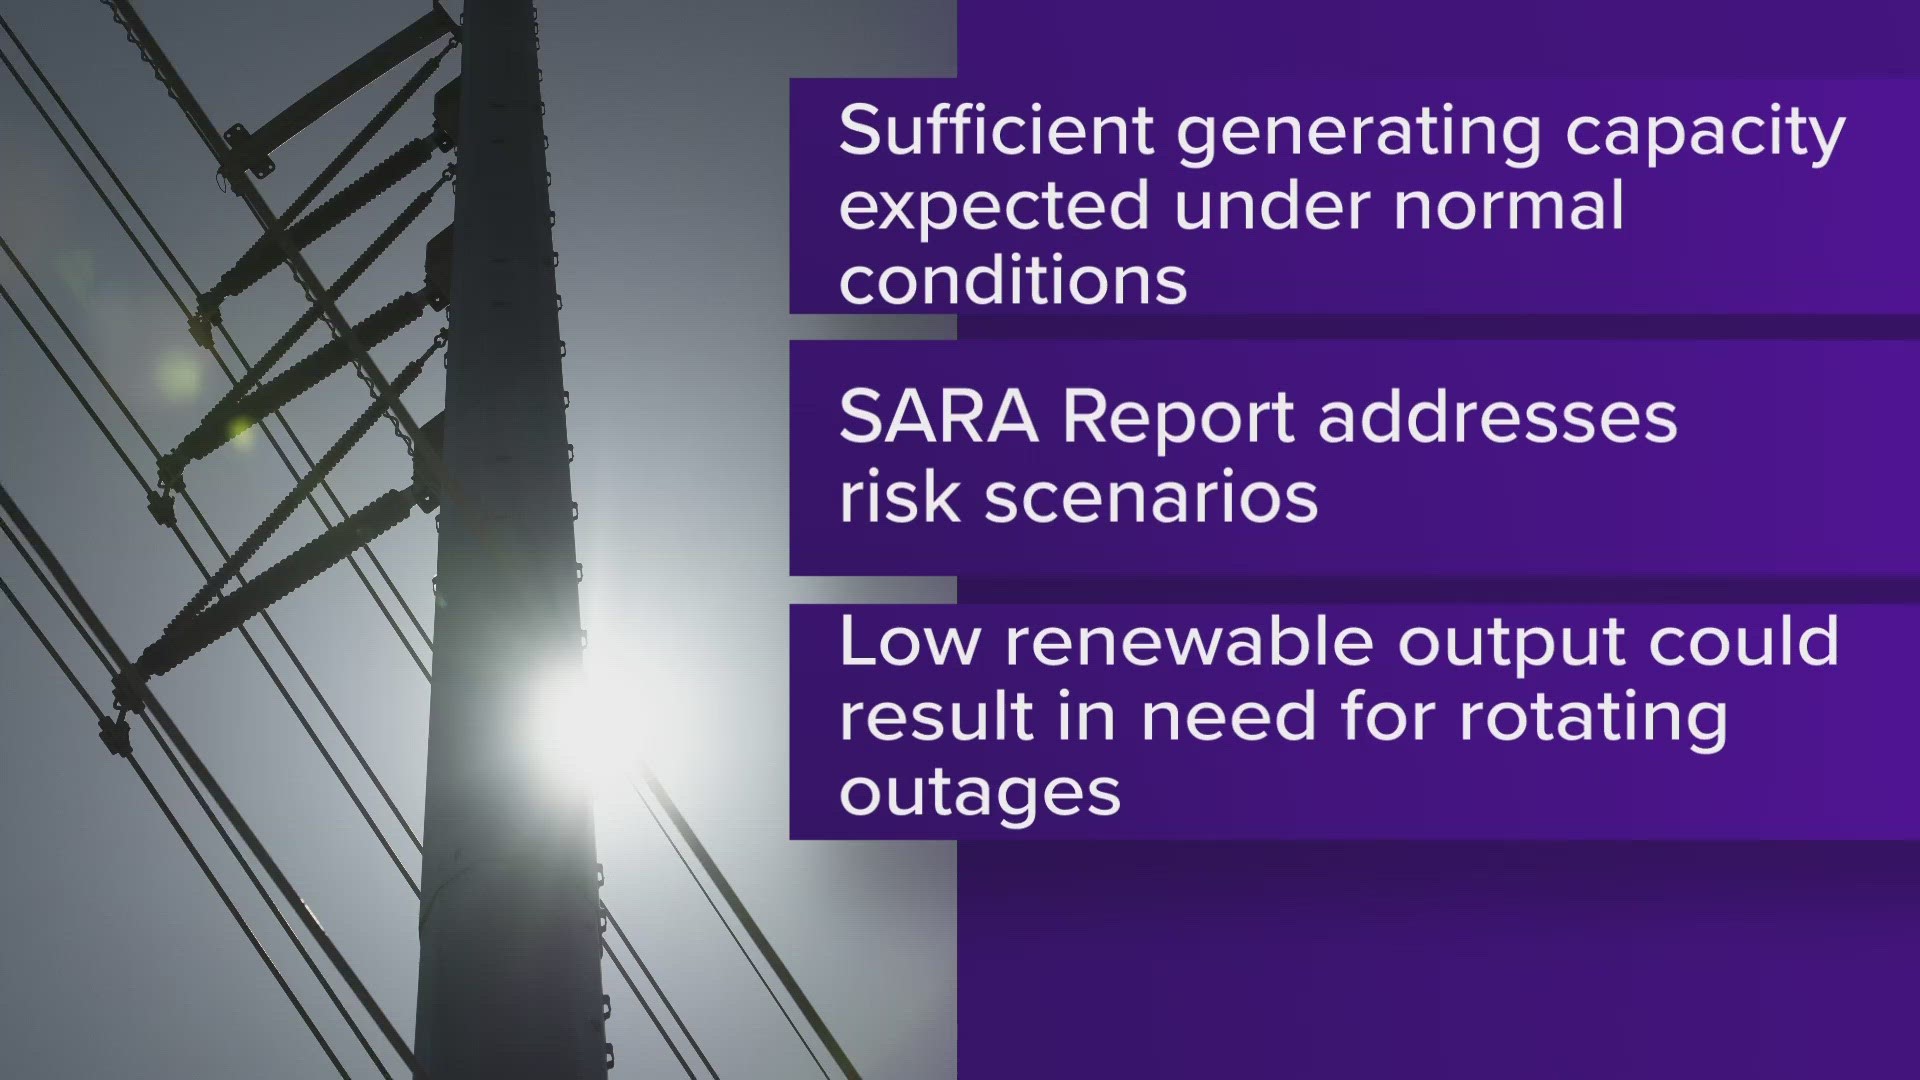 Officials with ERCOT say there could be rolling outages this fall in an extreme scenario.